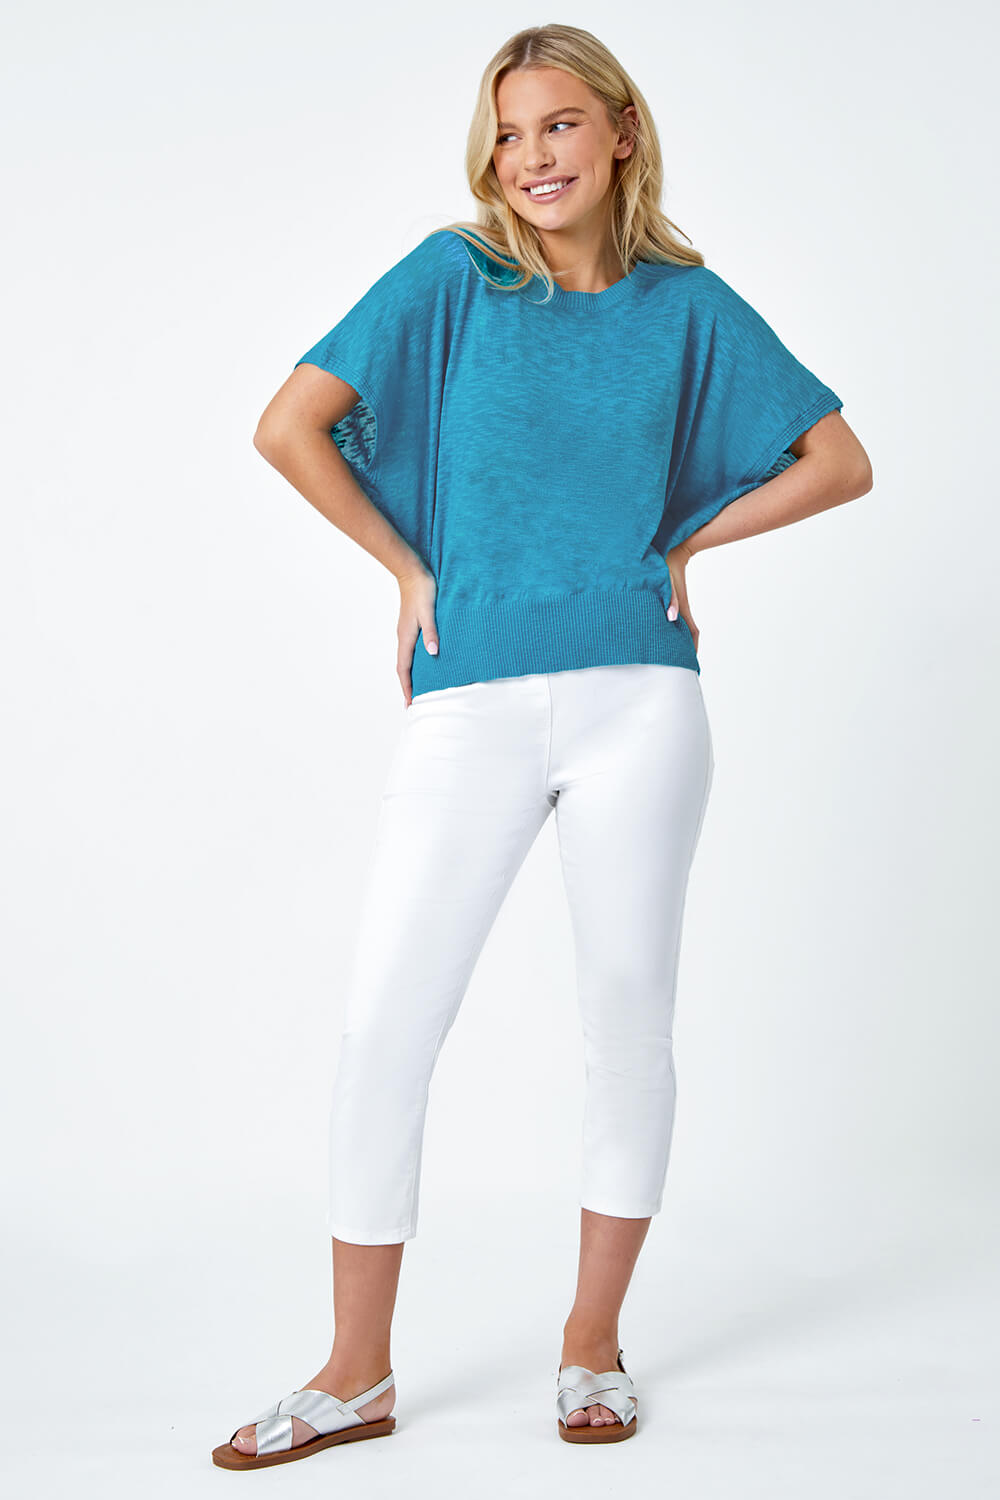 Turquoise Petite Cotton Blend Textured Knit Top, Image 2 of 5